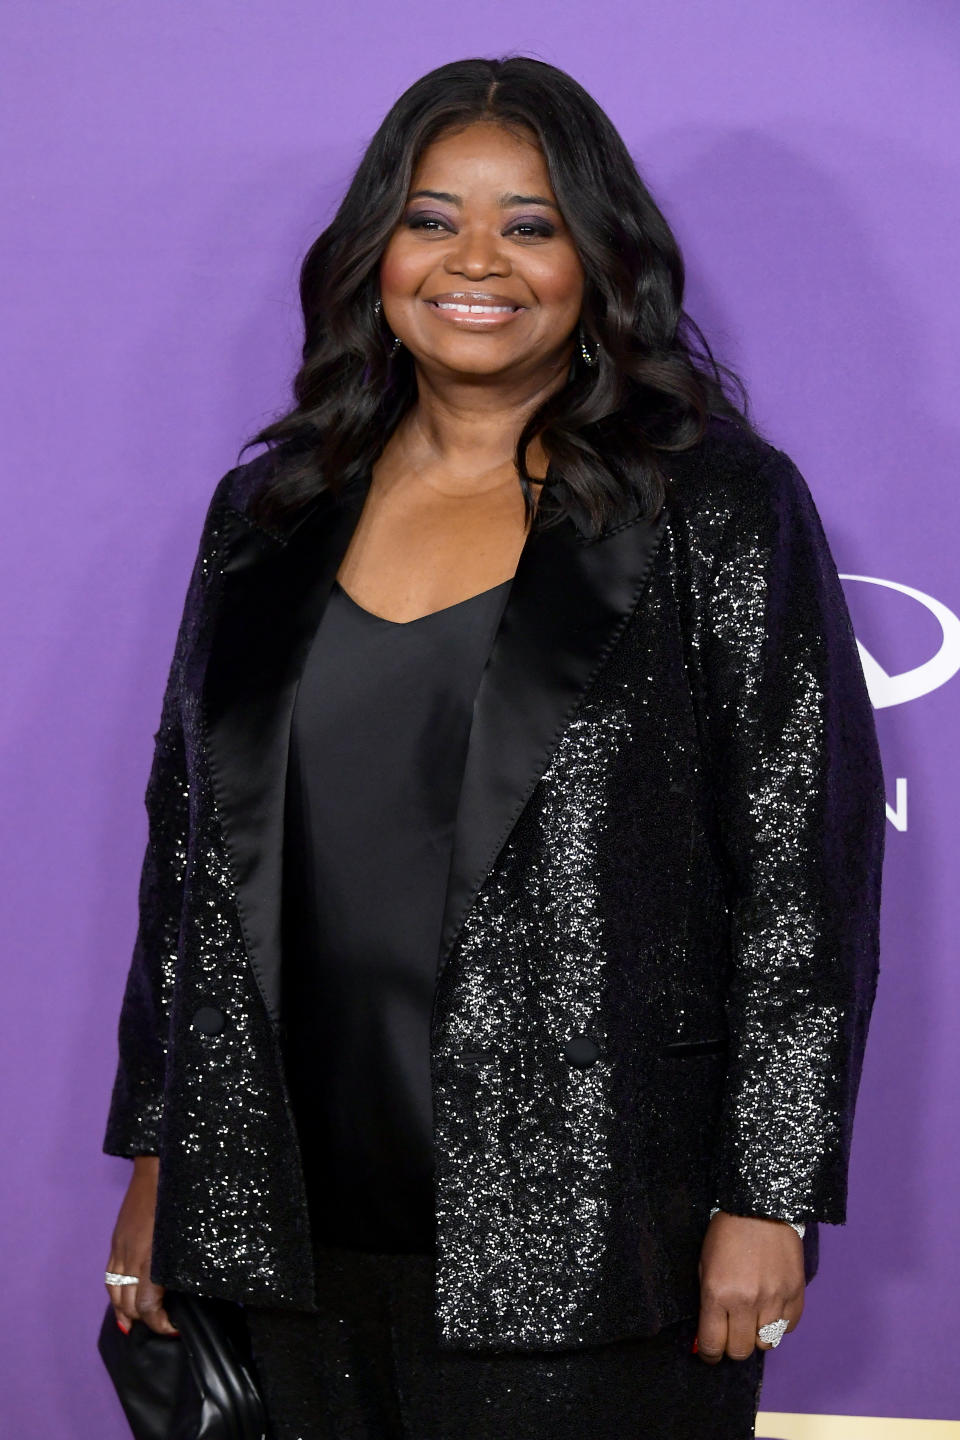 Octavia Spencer on the purple carpet in a sparkly black jacket and black top, smiling